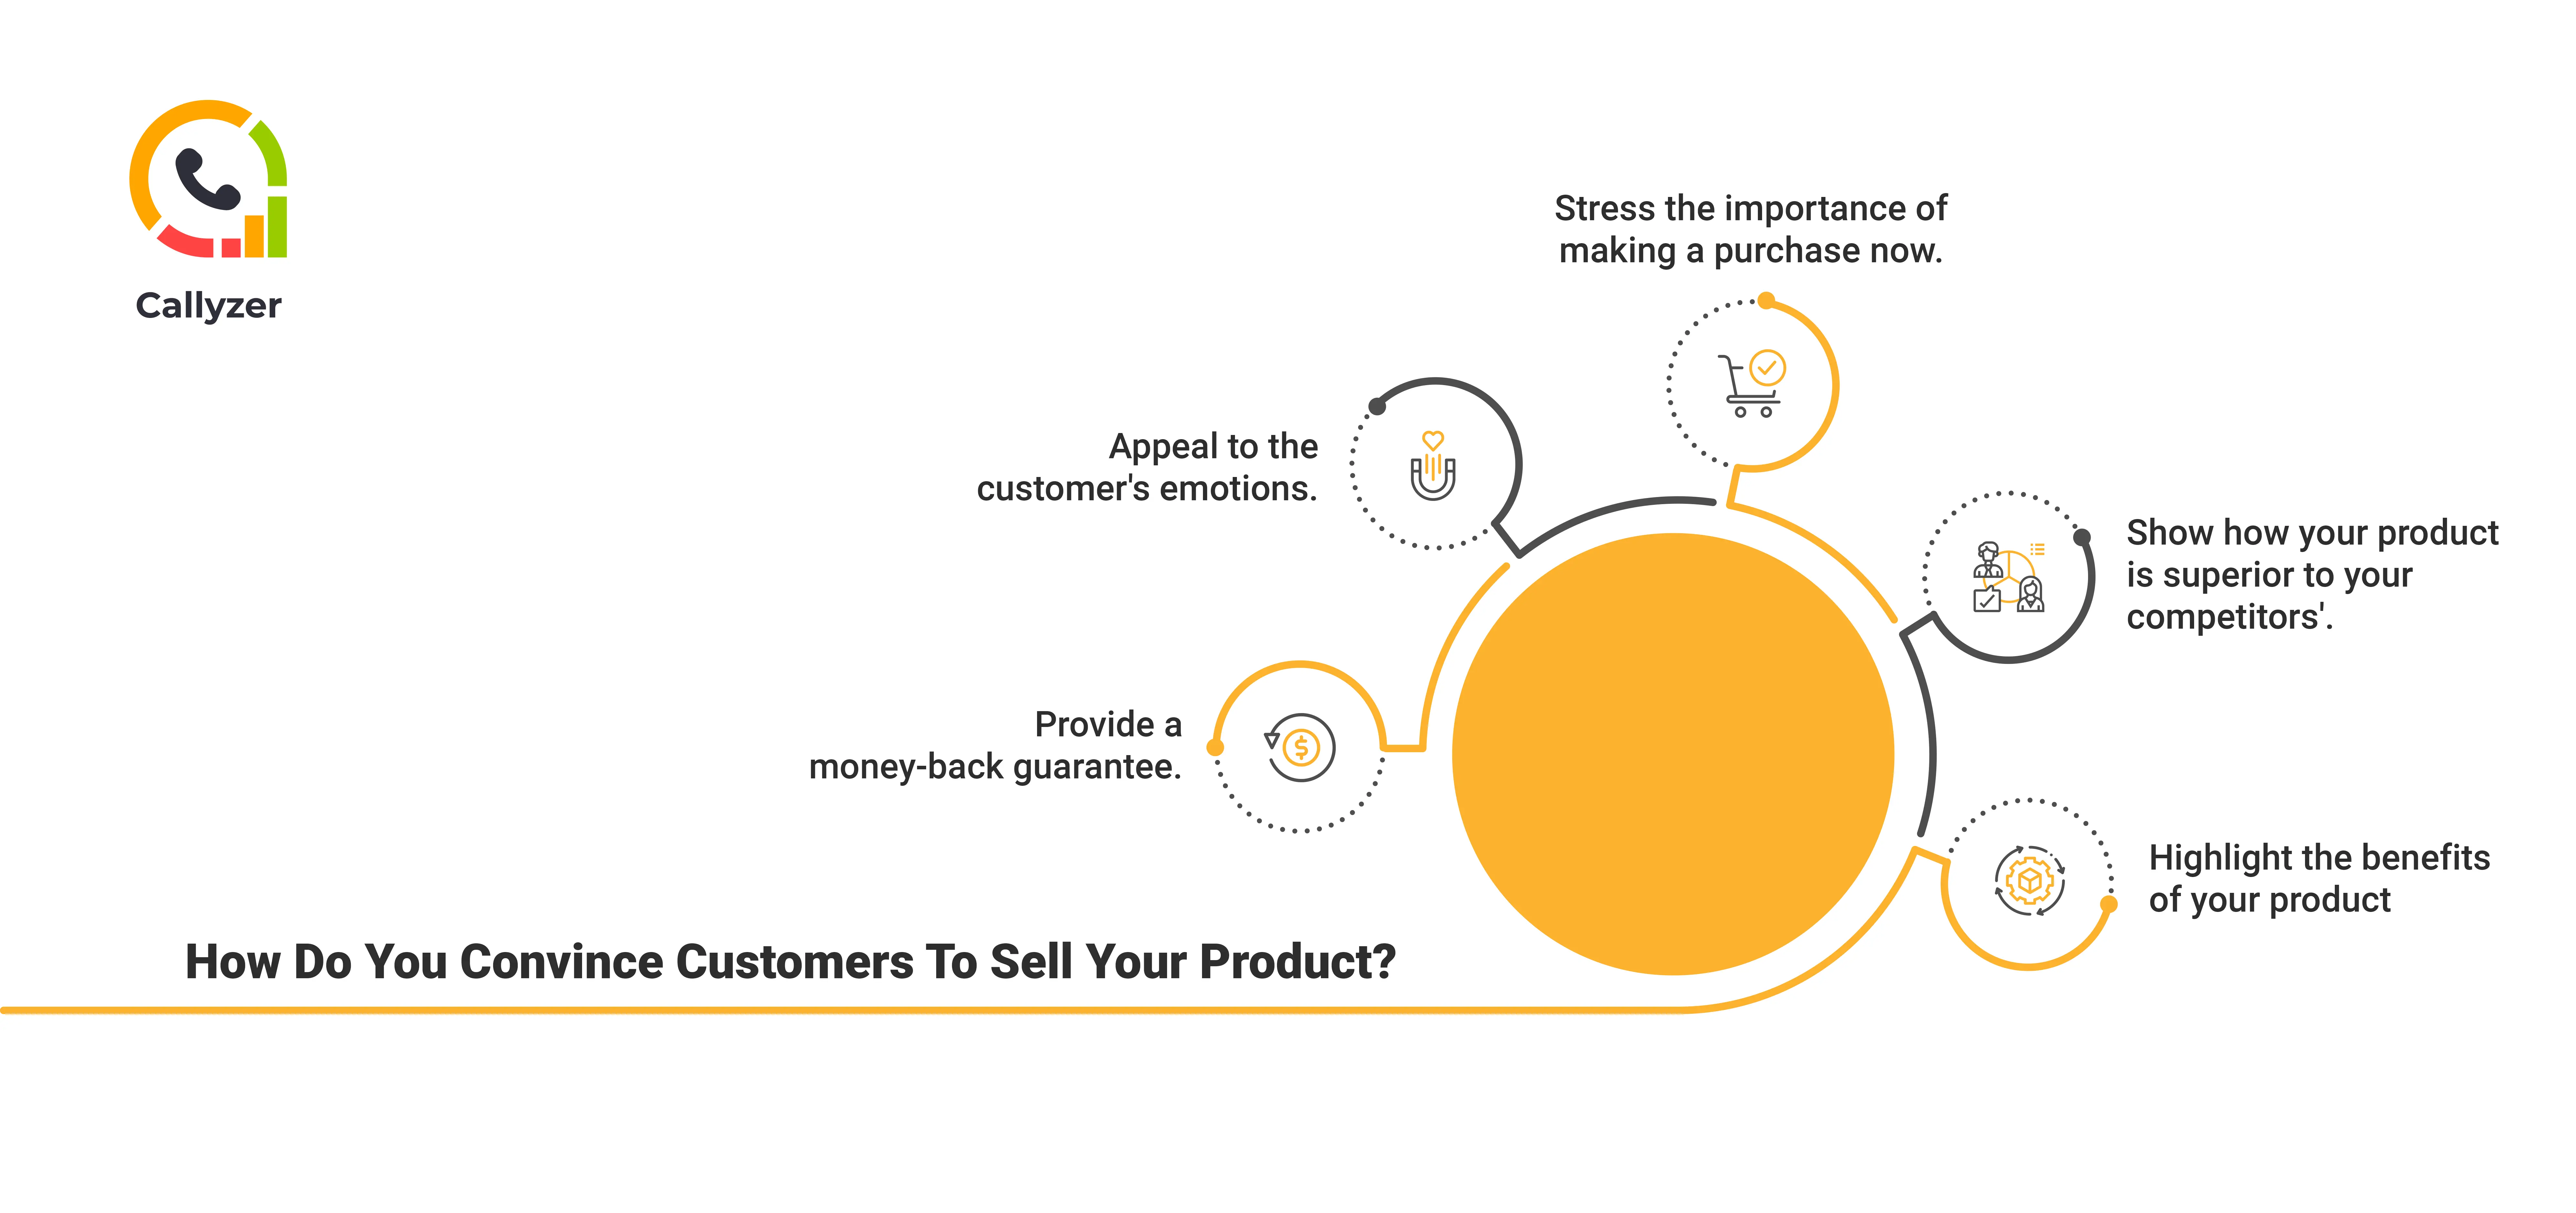 An infographic that shows key aspects of how you convince customers to sell your product